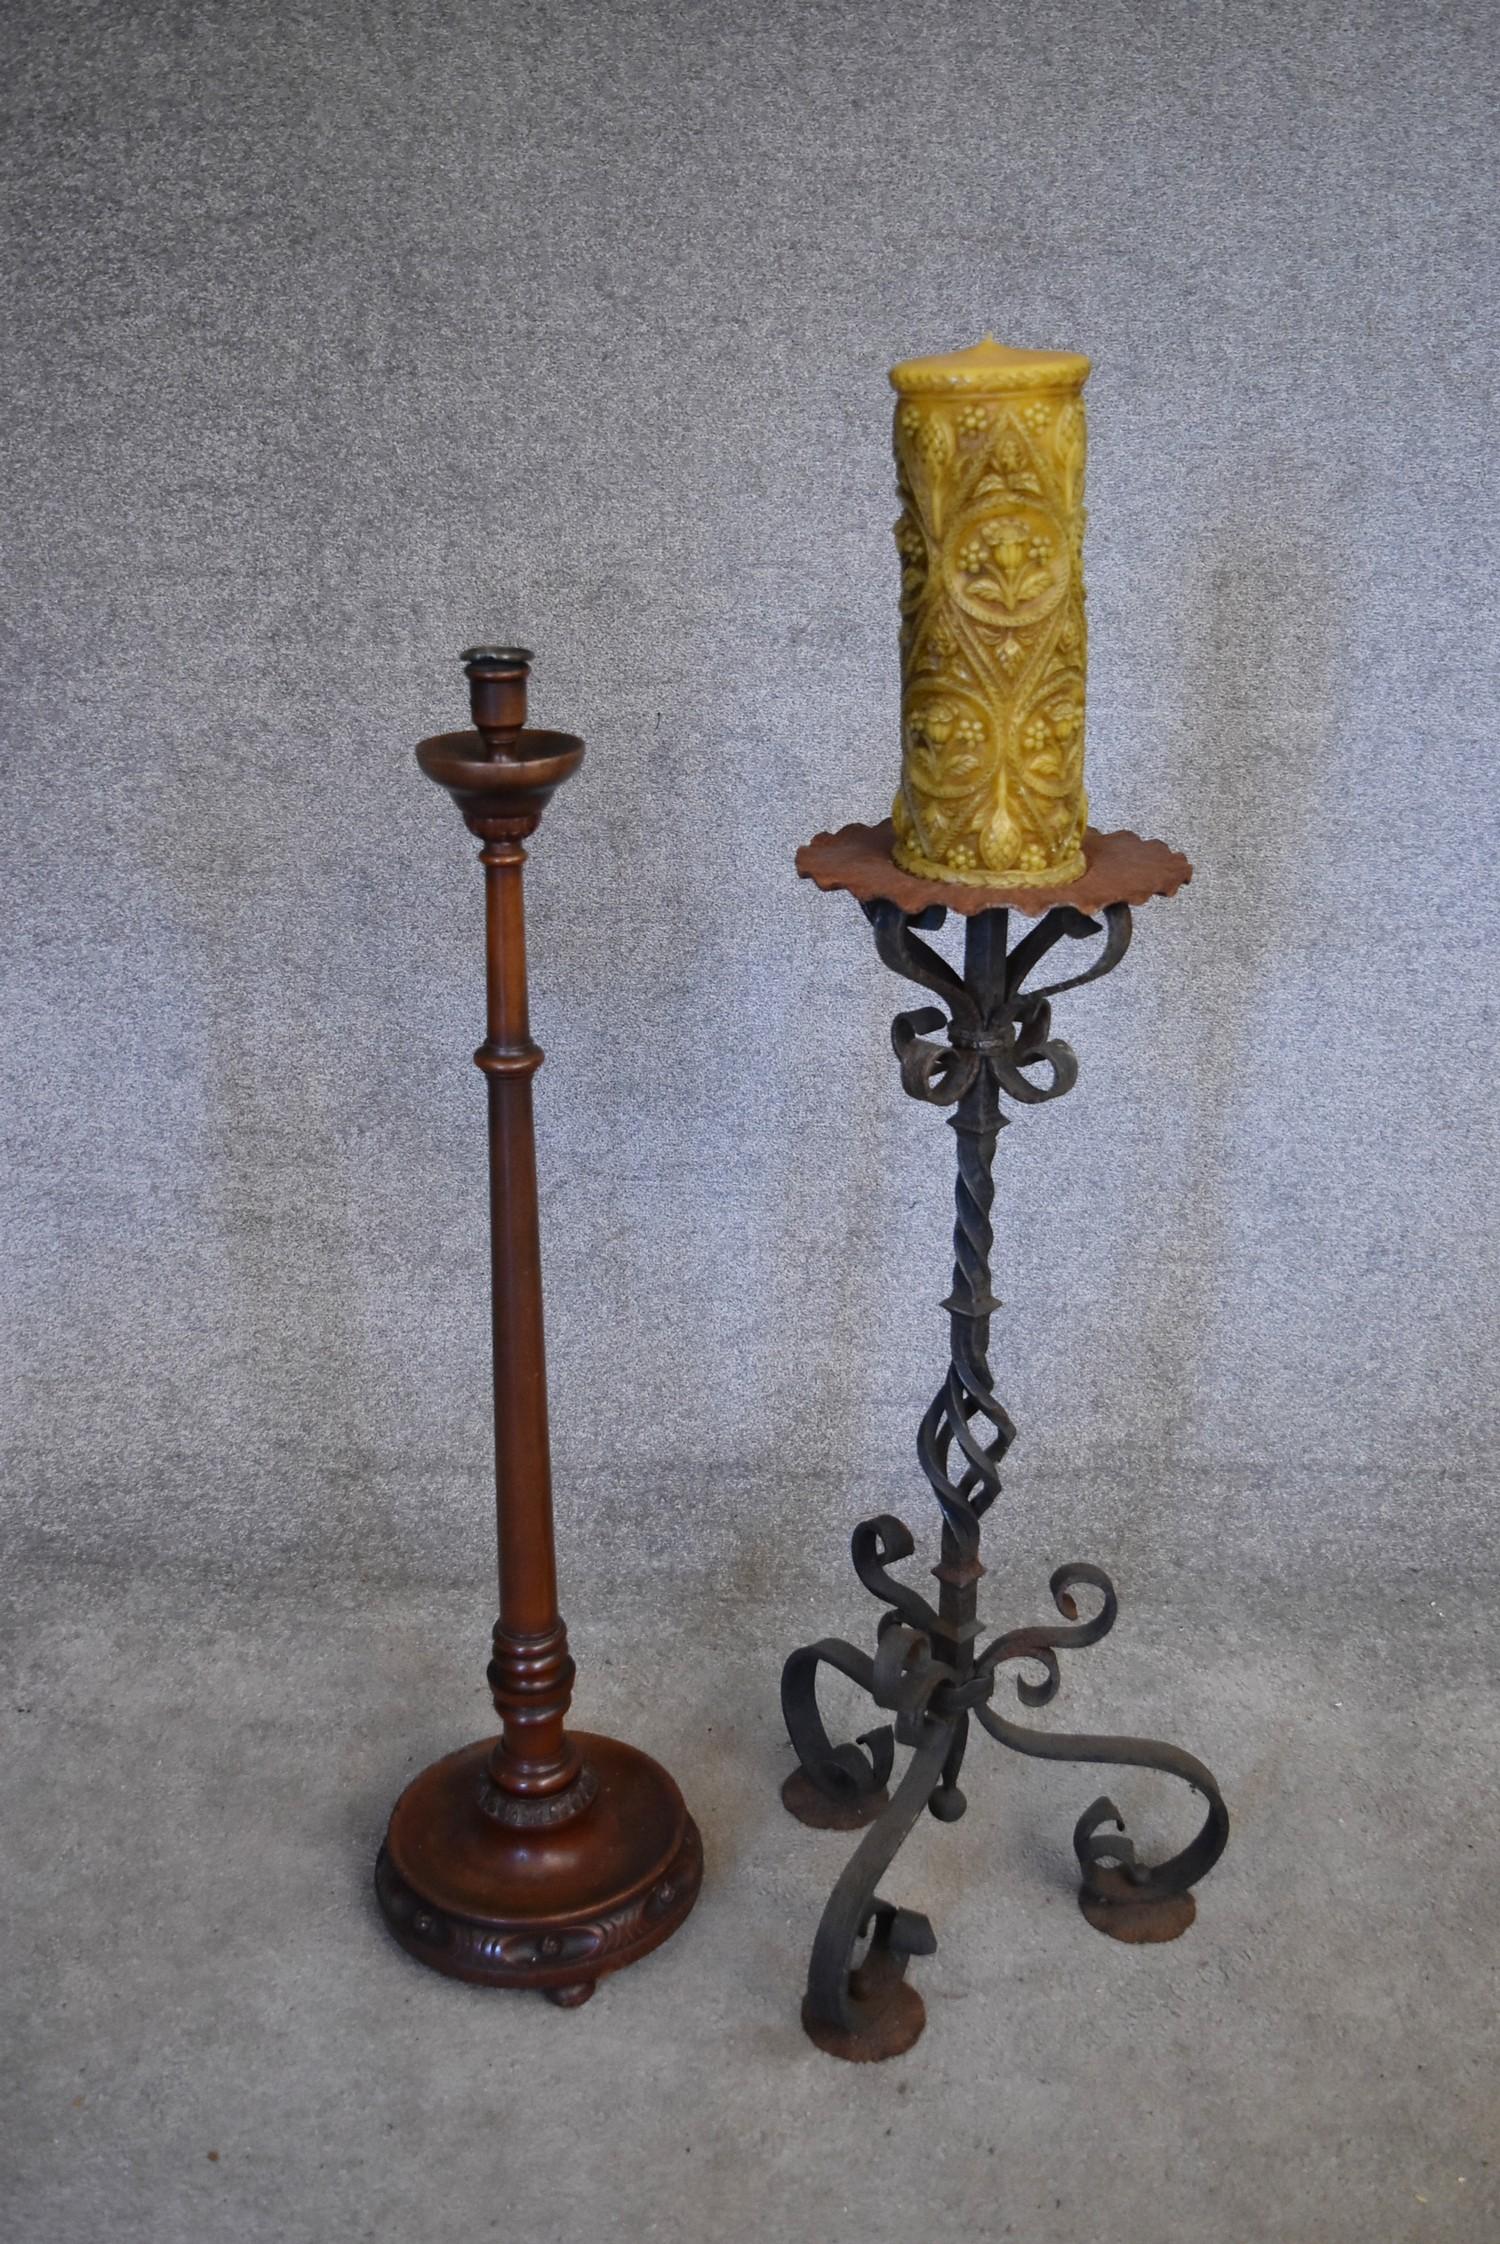 A wrought iron floor standing pricket candlestick and a turned wooden example. H.100cm